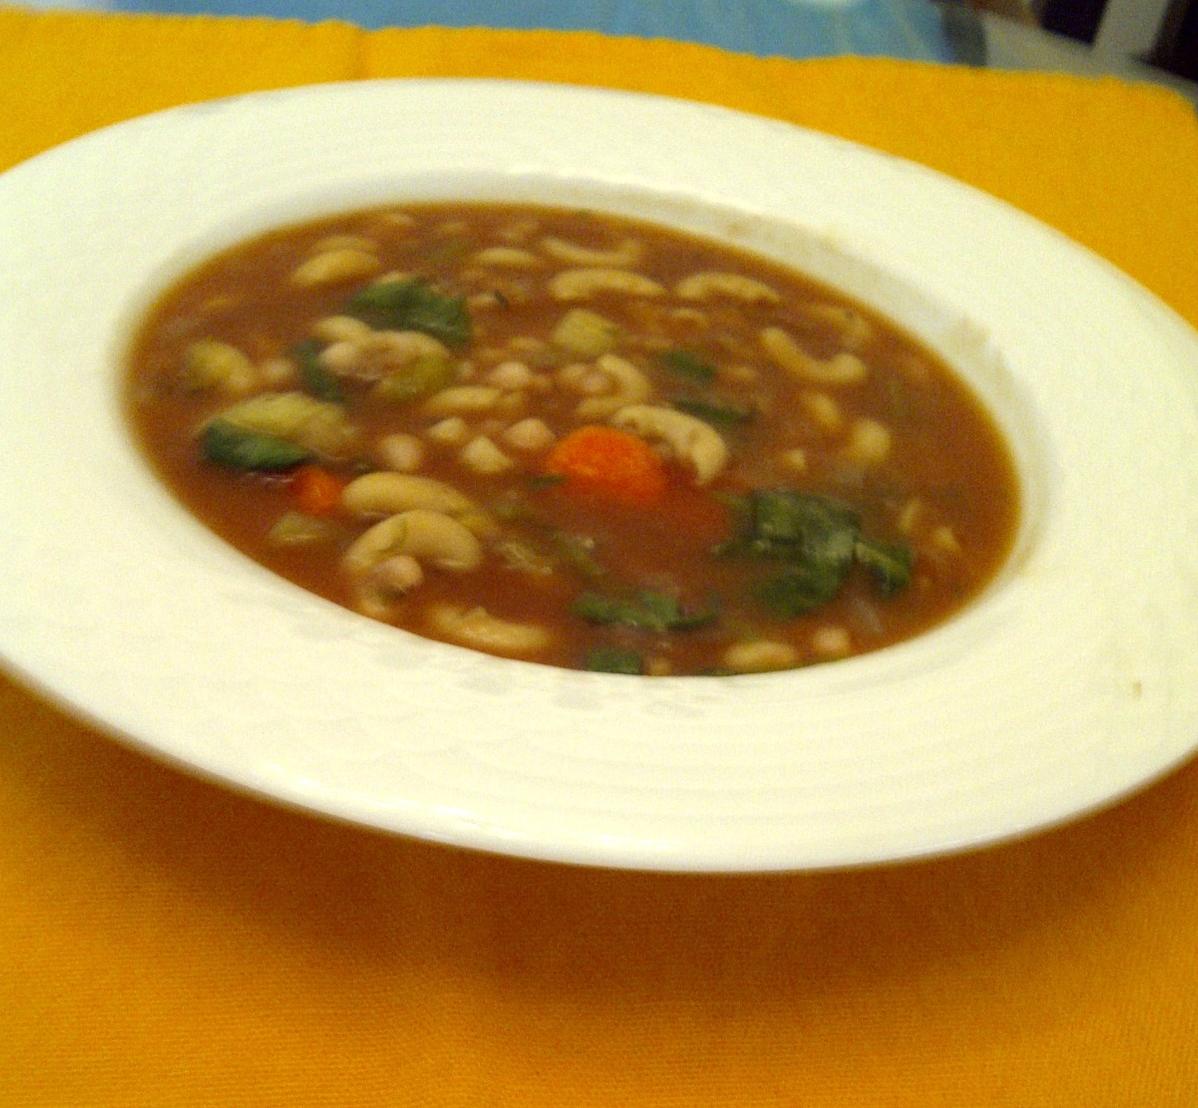  Warm up with a bowl of Hearty Navy Bean Soup!